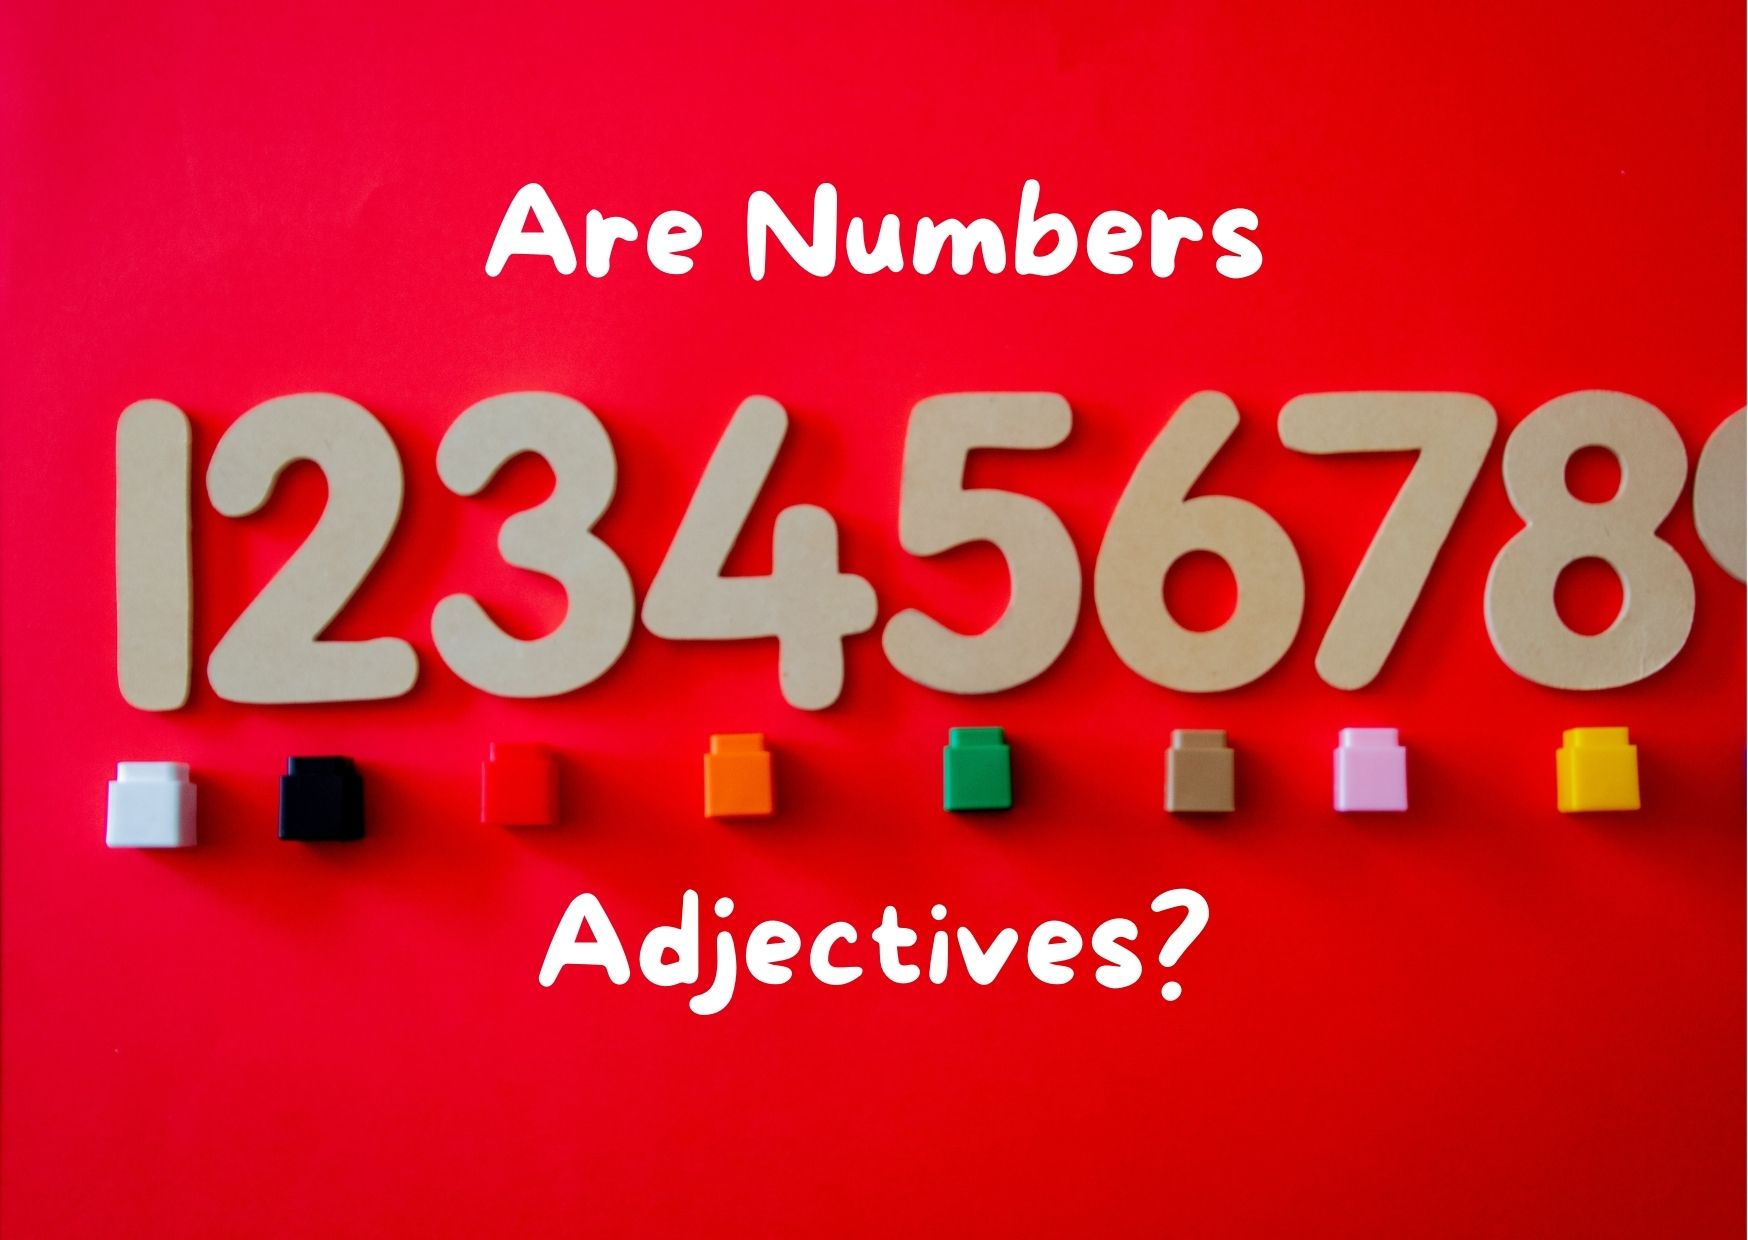 Graphics with numbers and the question: "Are numbers adjectives?"